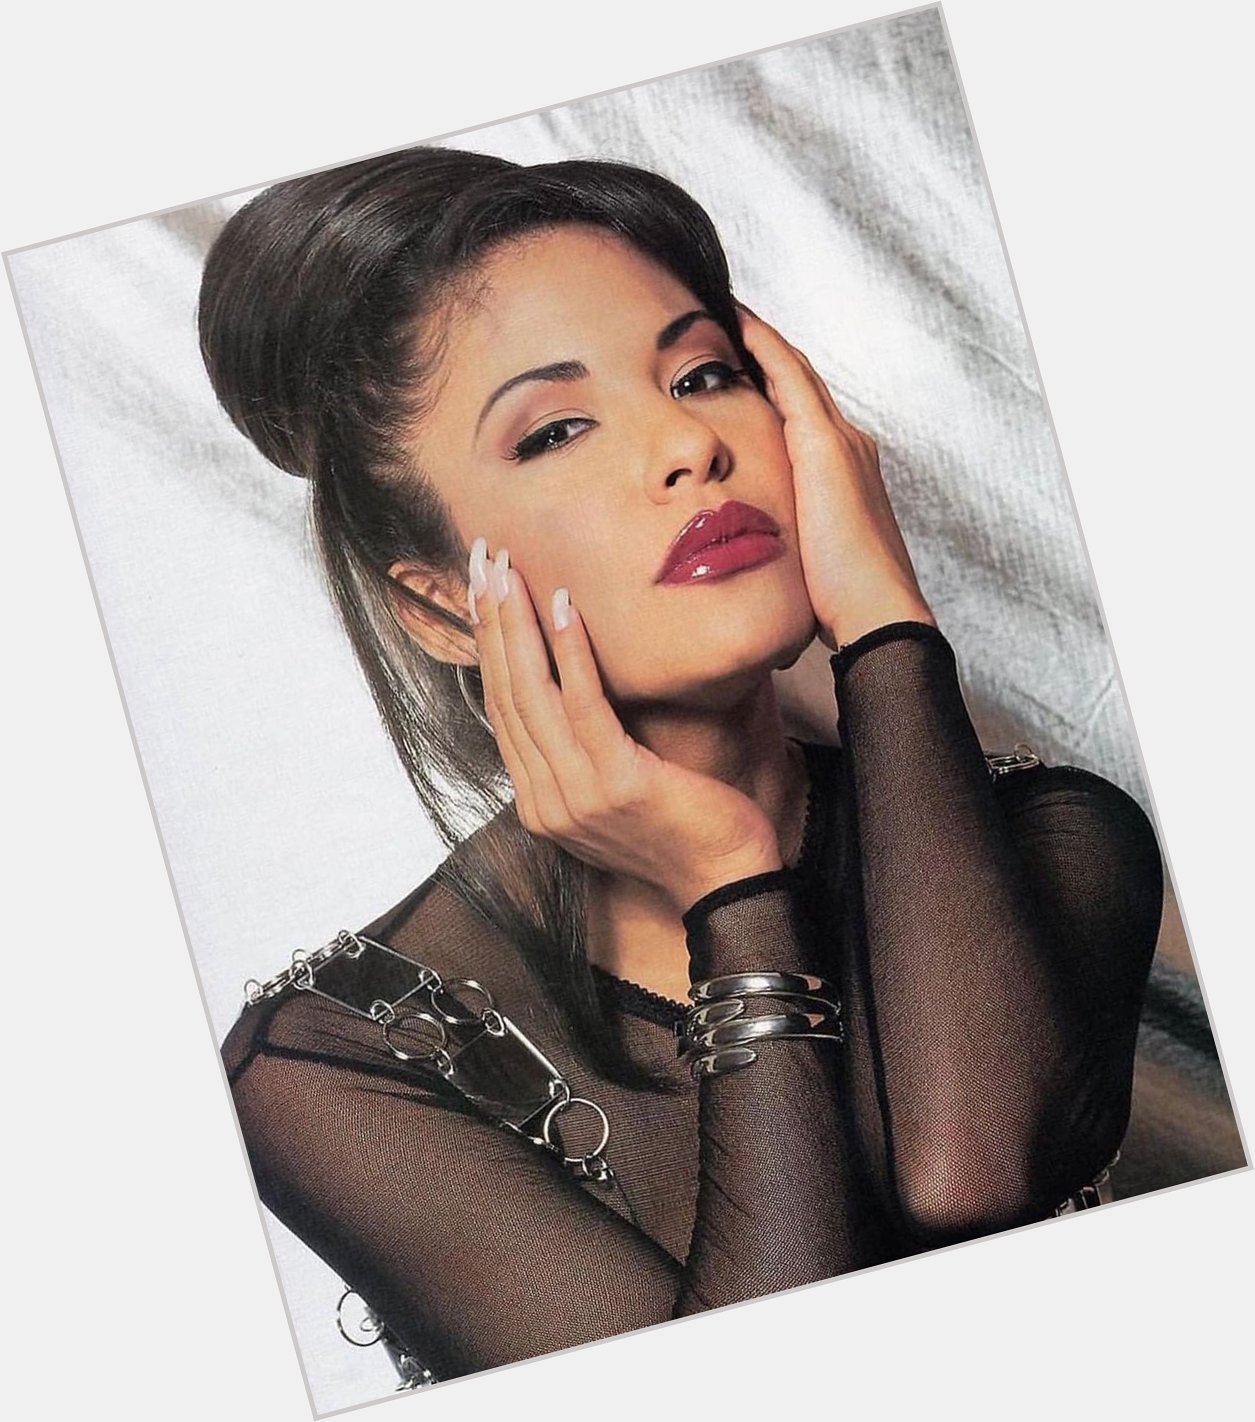 Happy (belated) birthday to the queen of tejano music, Selena Quintanilla Pérez. She would have turned 52. 